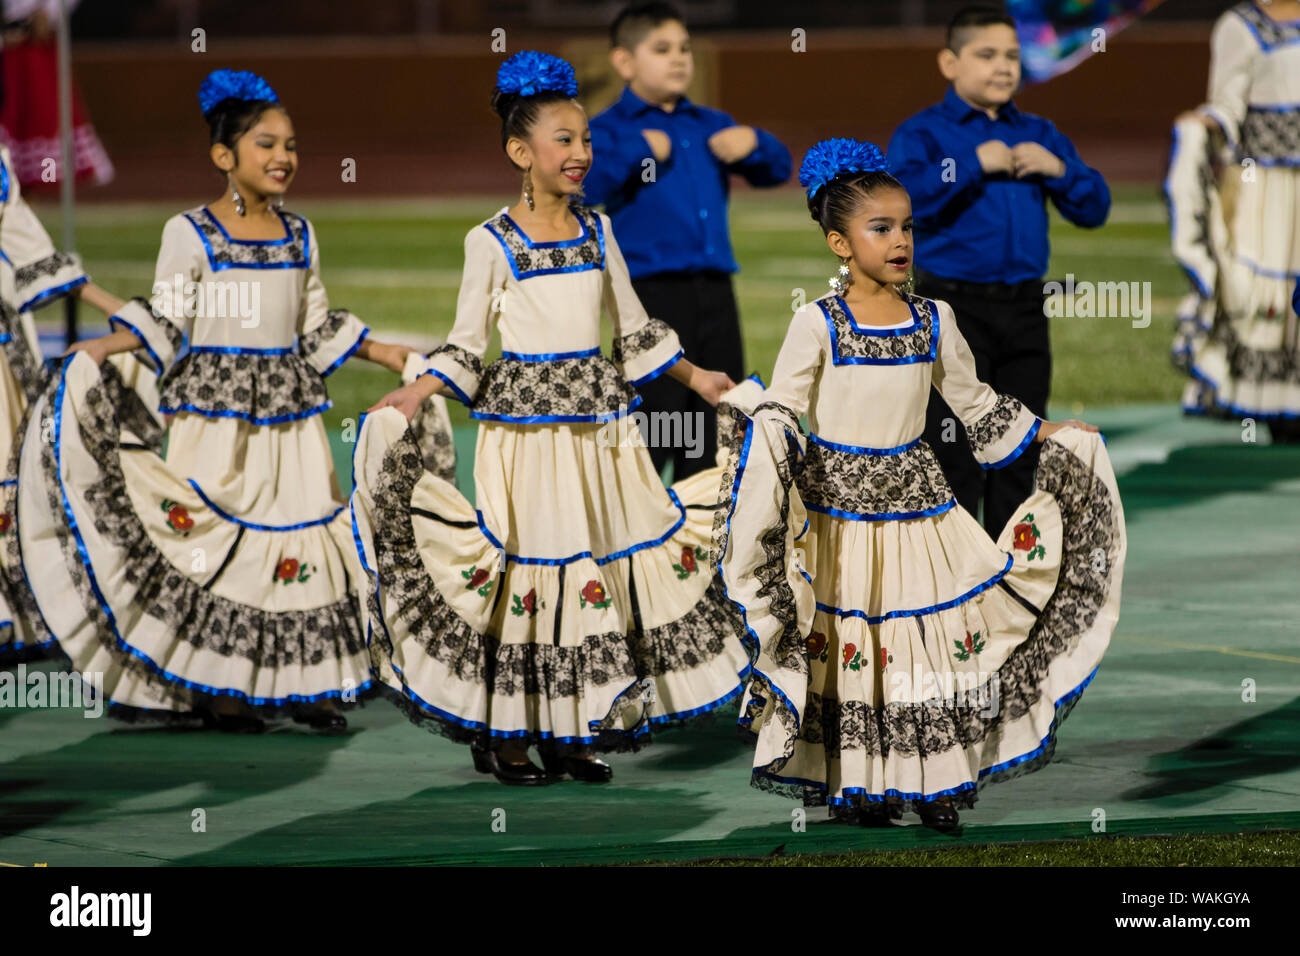 Children performing Mexican folk dance in traditional clothing. (Editorial Use Only) Stock Photo